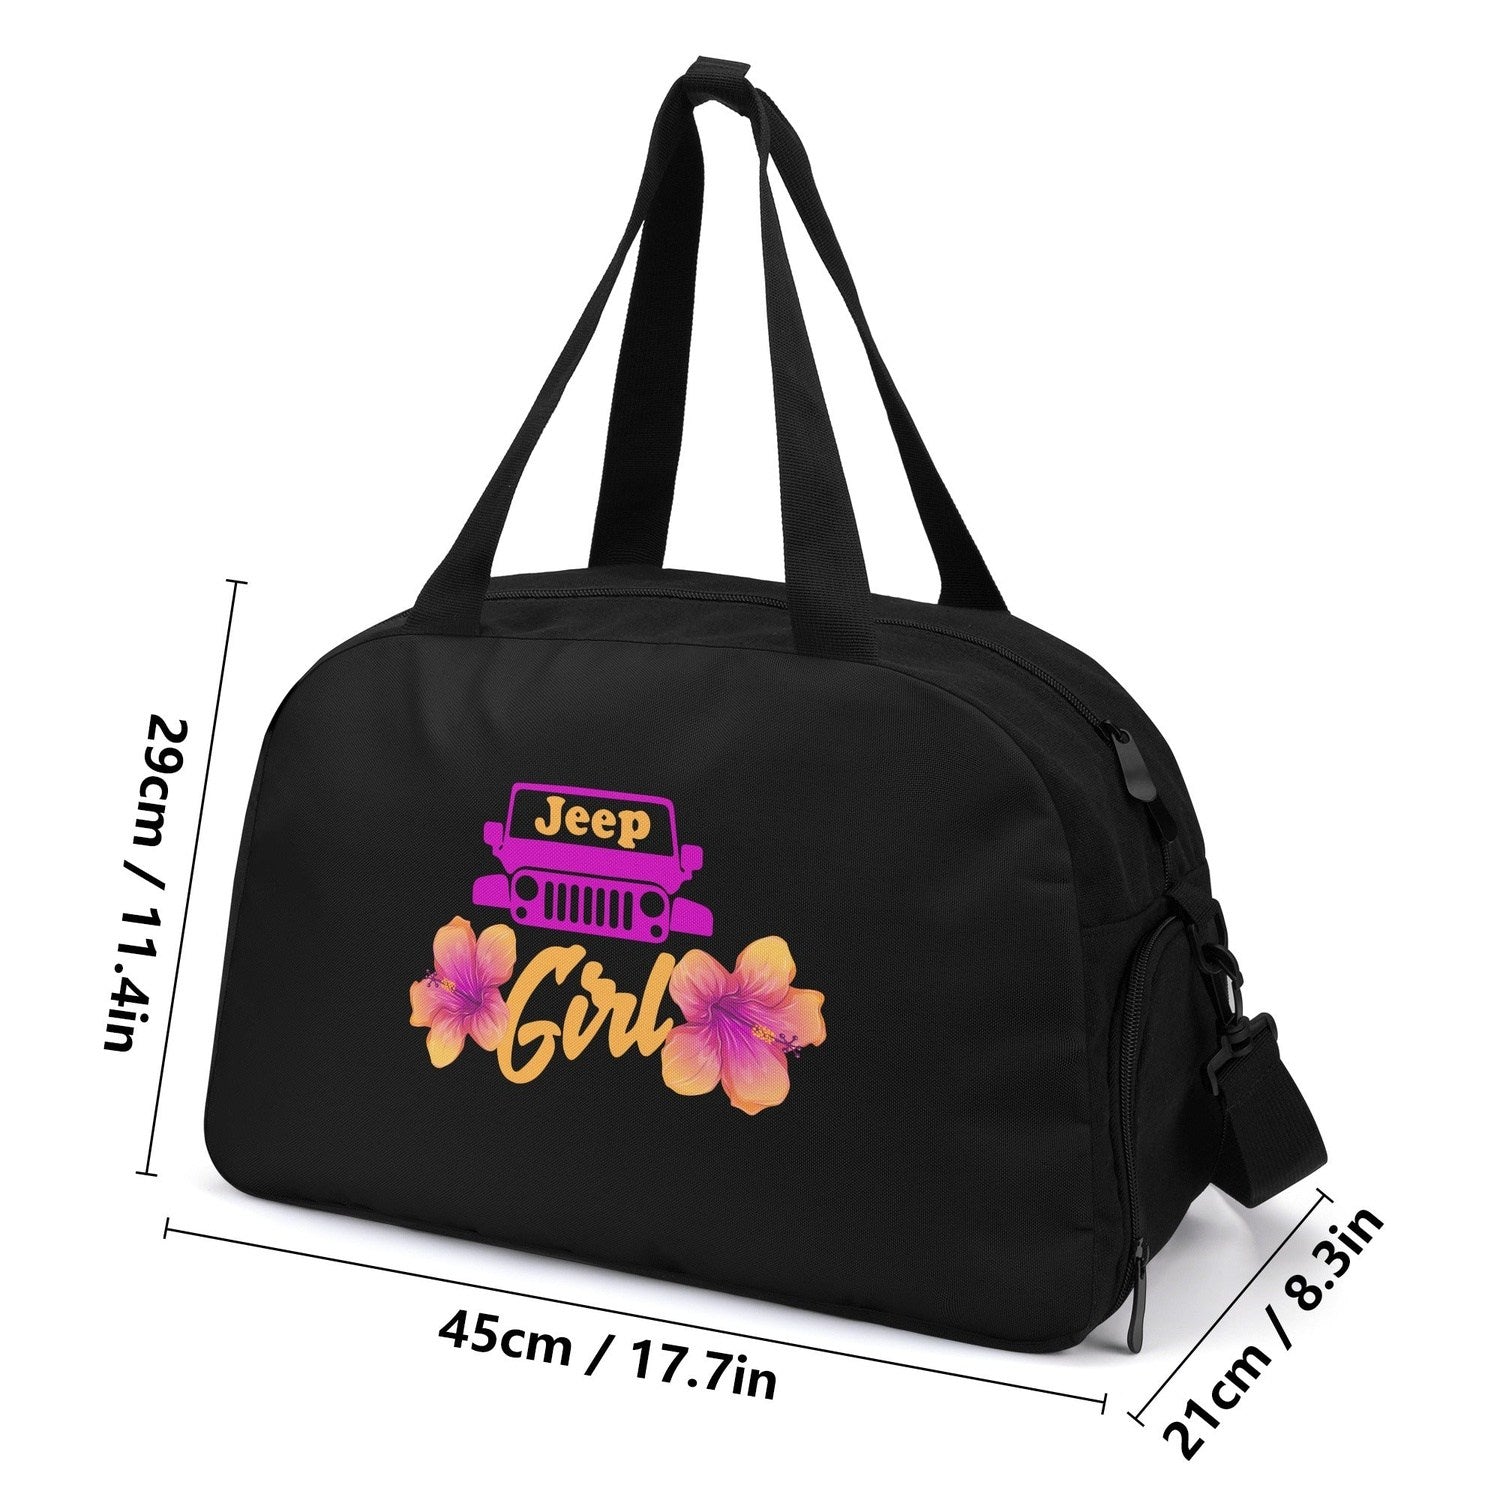 Jeeper Girl Travel Luggage Bag